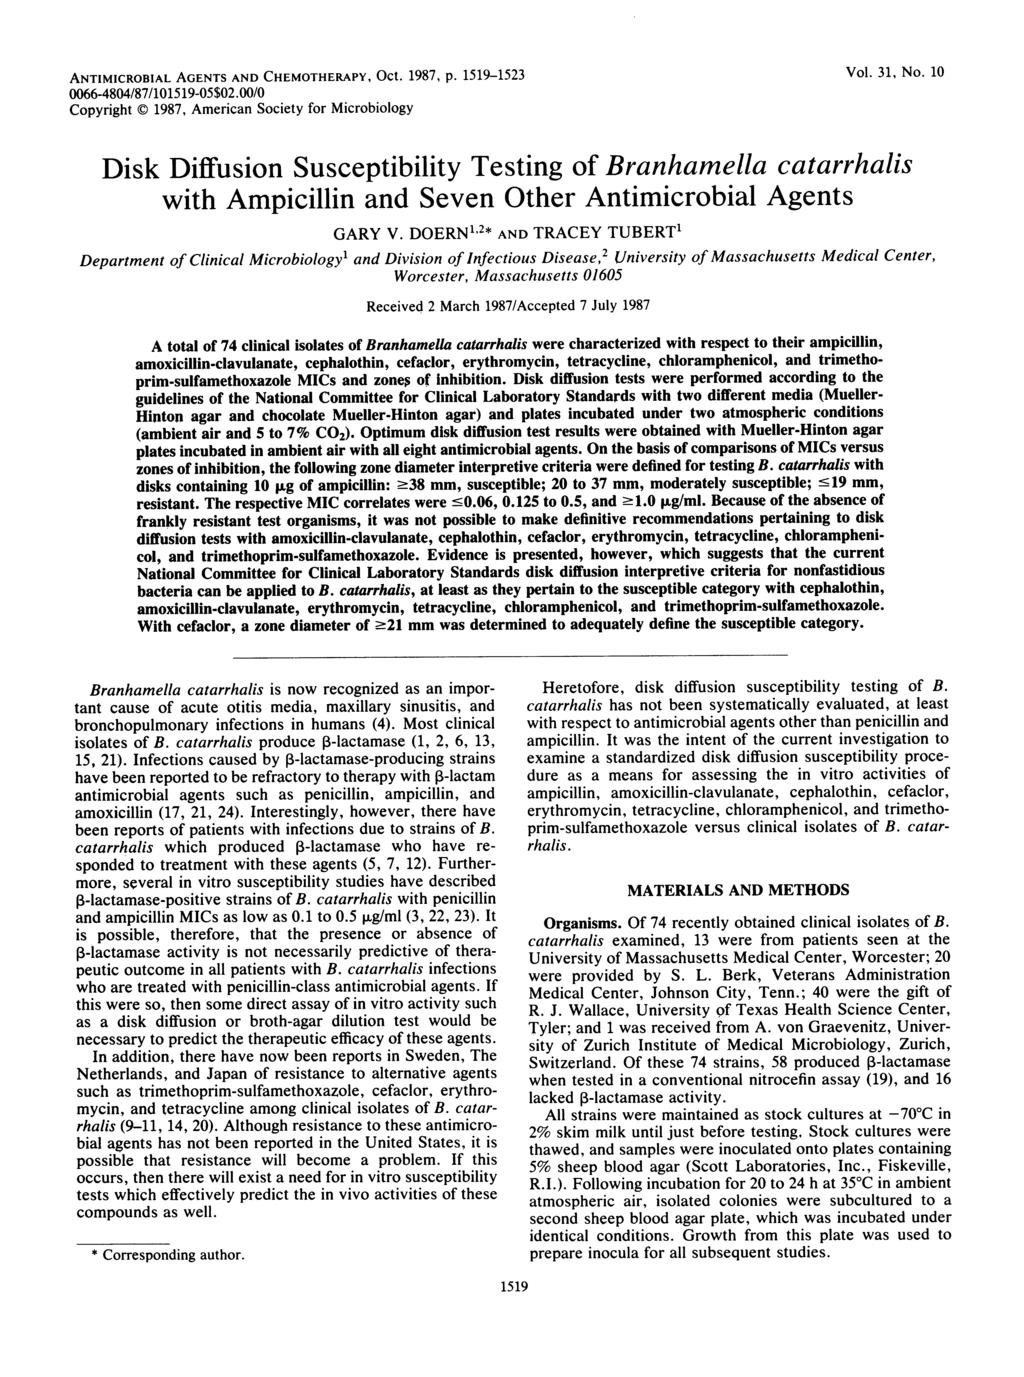 ANTIMICROBIAL AGENTS AND CHEMOTHERAPY, Oct. 1987, p. 1519-1523 Vol. 31, No.